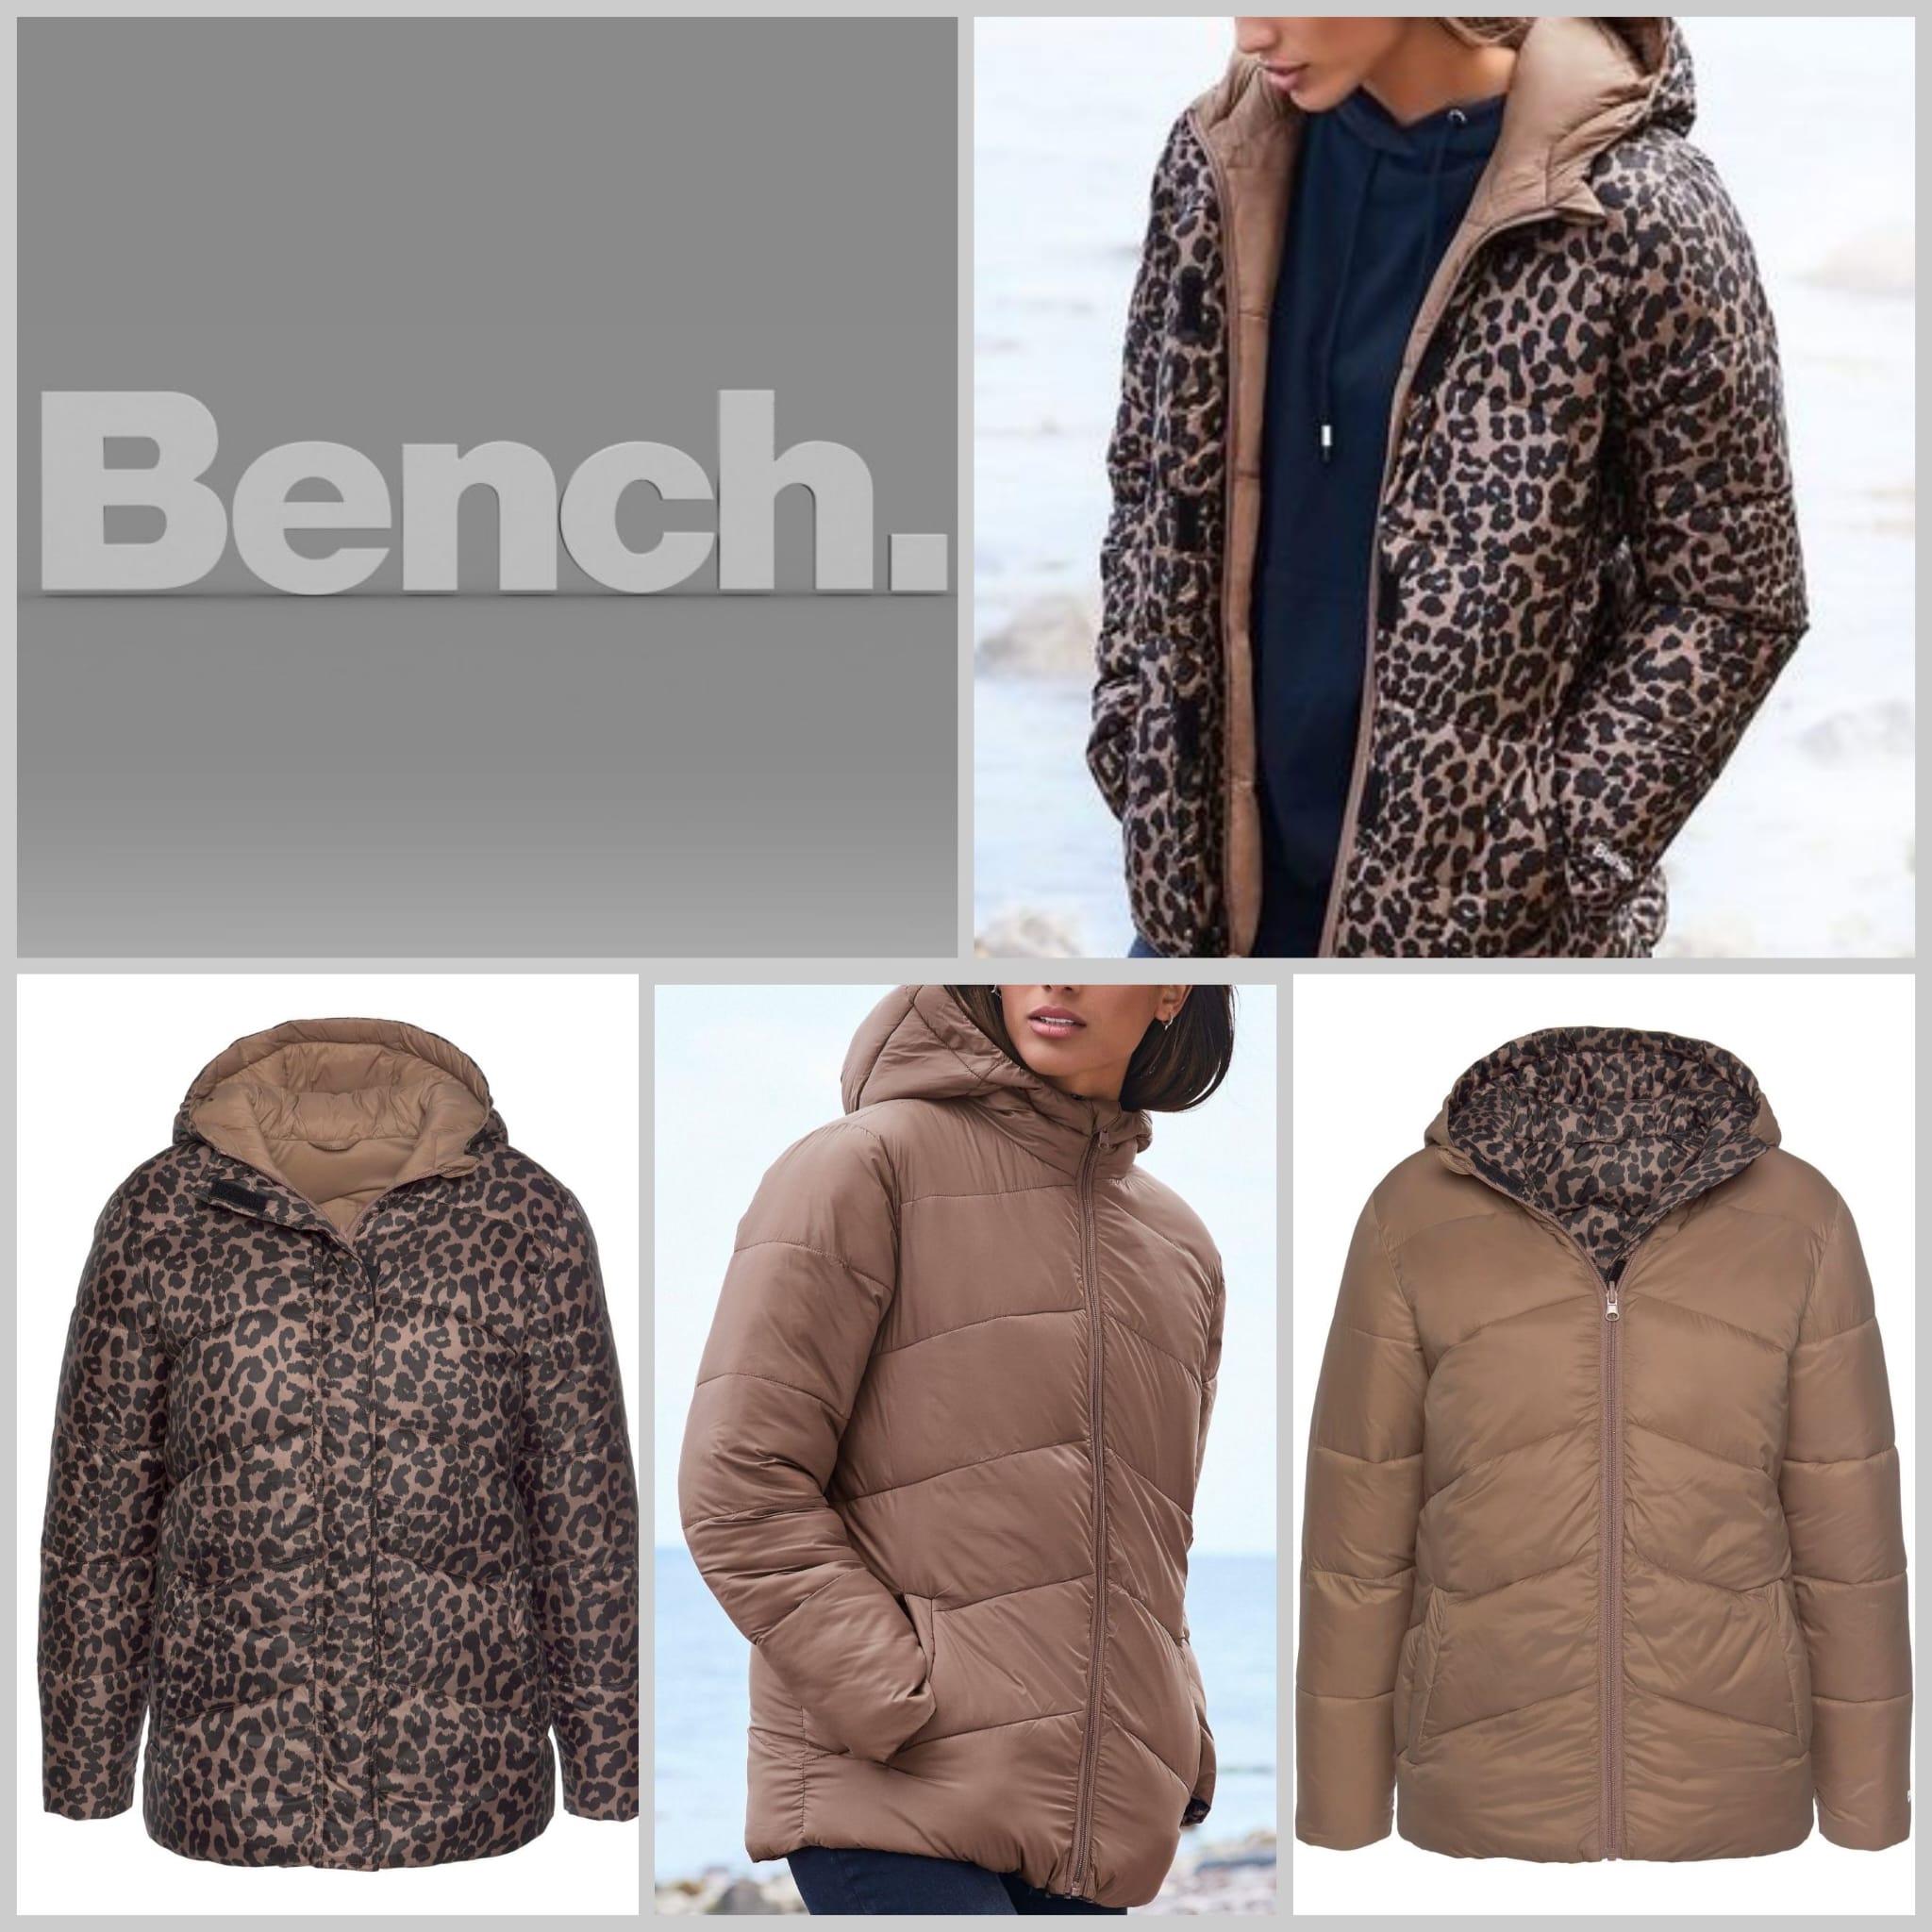 Women's reversible jackets from Bench